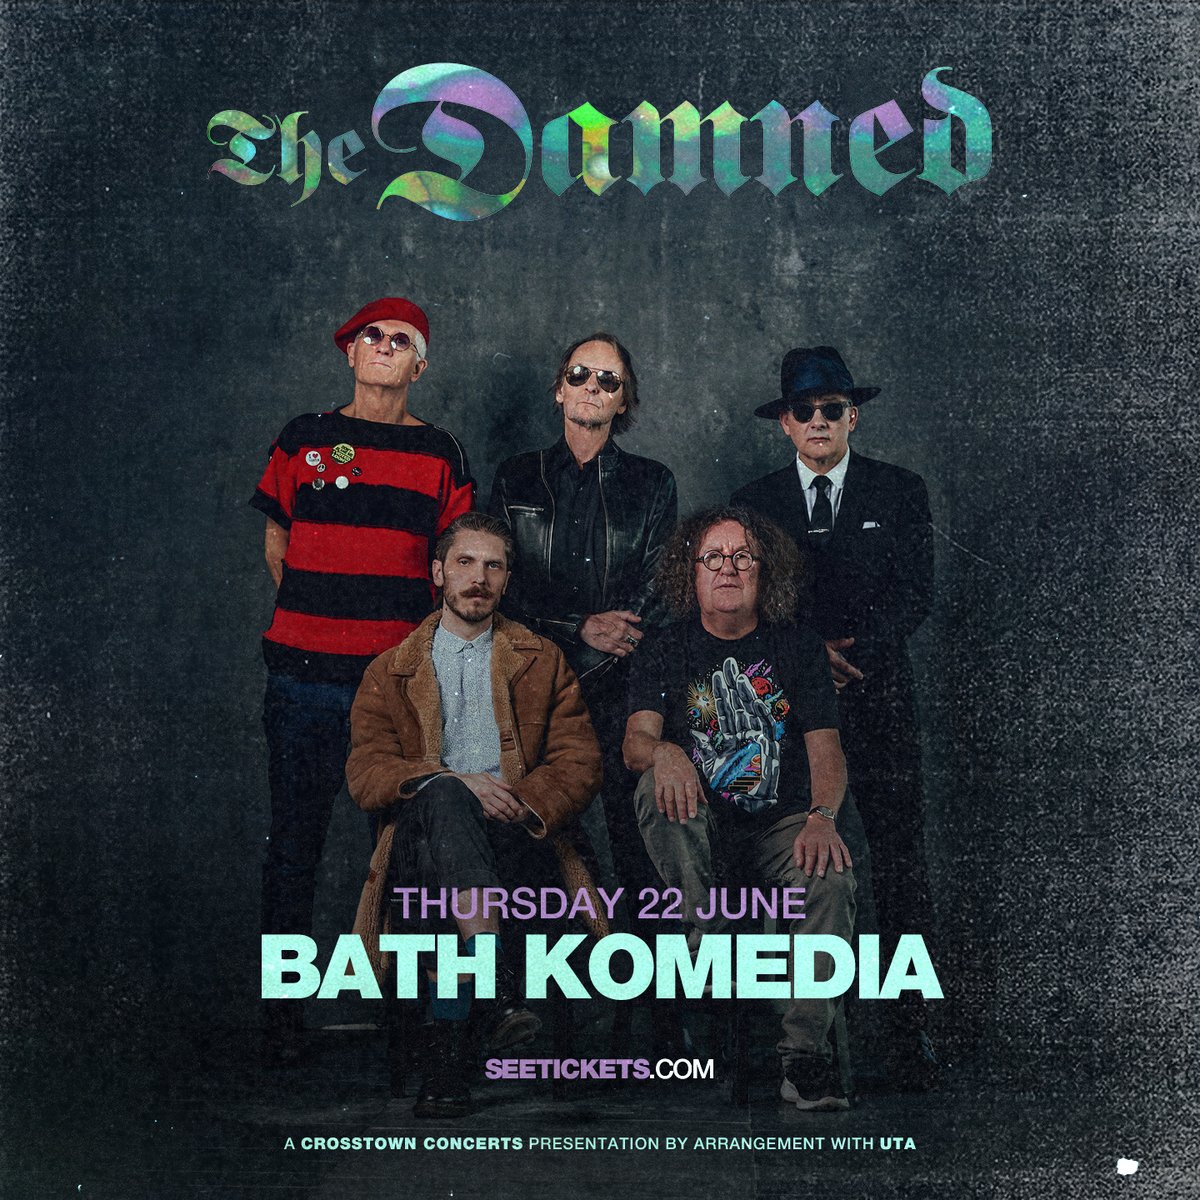 We'll be returning to @KomediaBath on Thursday 22 June! Tickets on sale this Friday 10am BST: seetickets.com/event/the-damn…